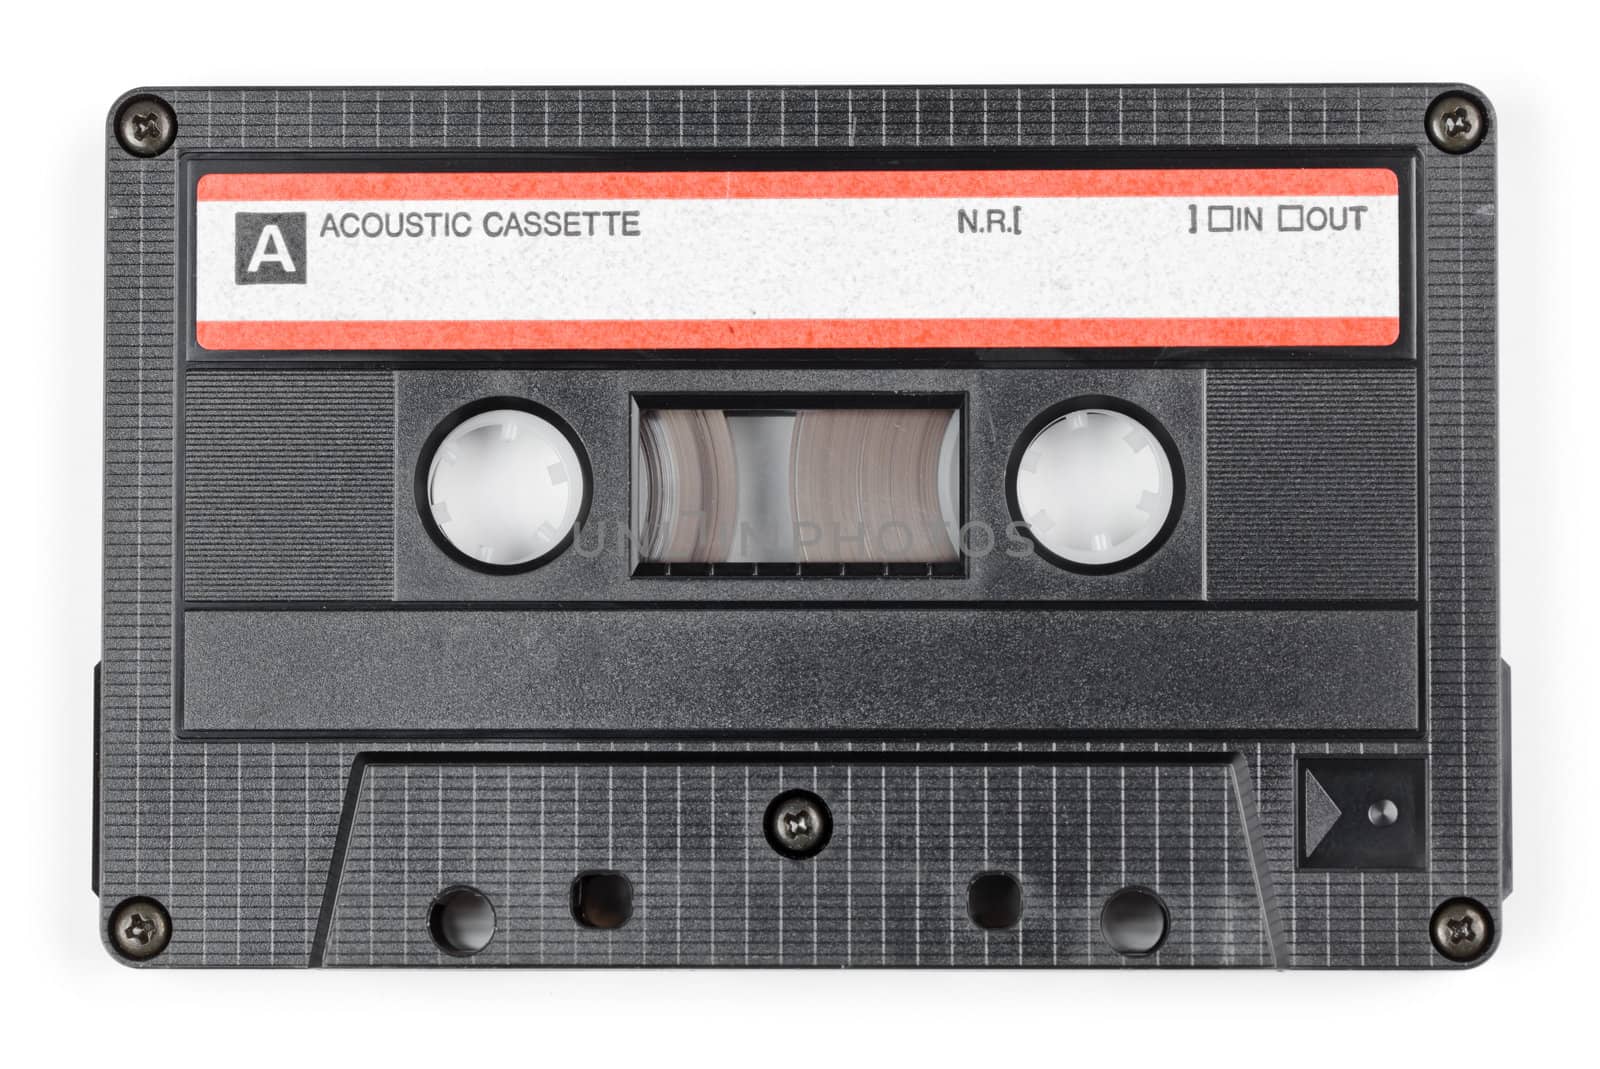 Vintage Compact Cassette on white background